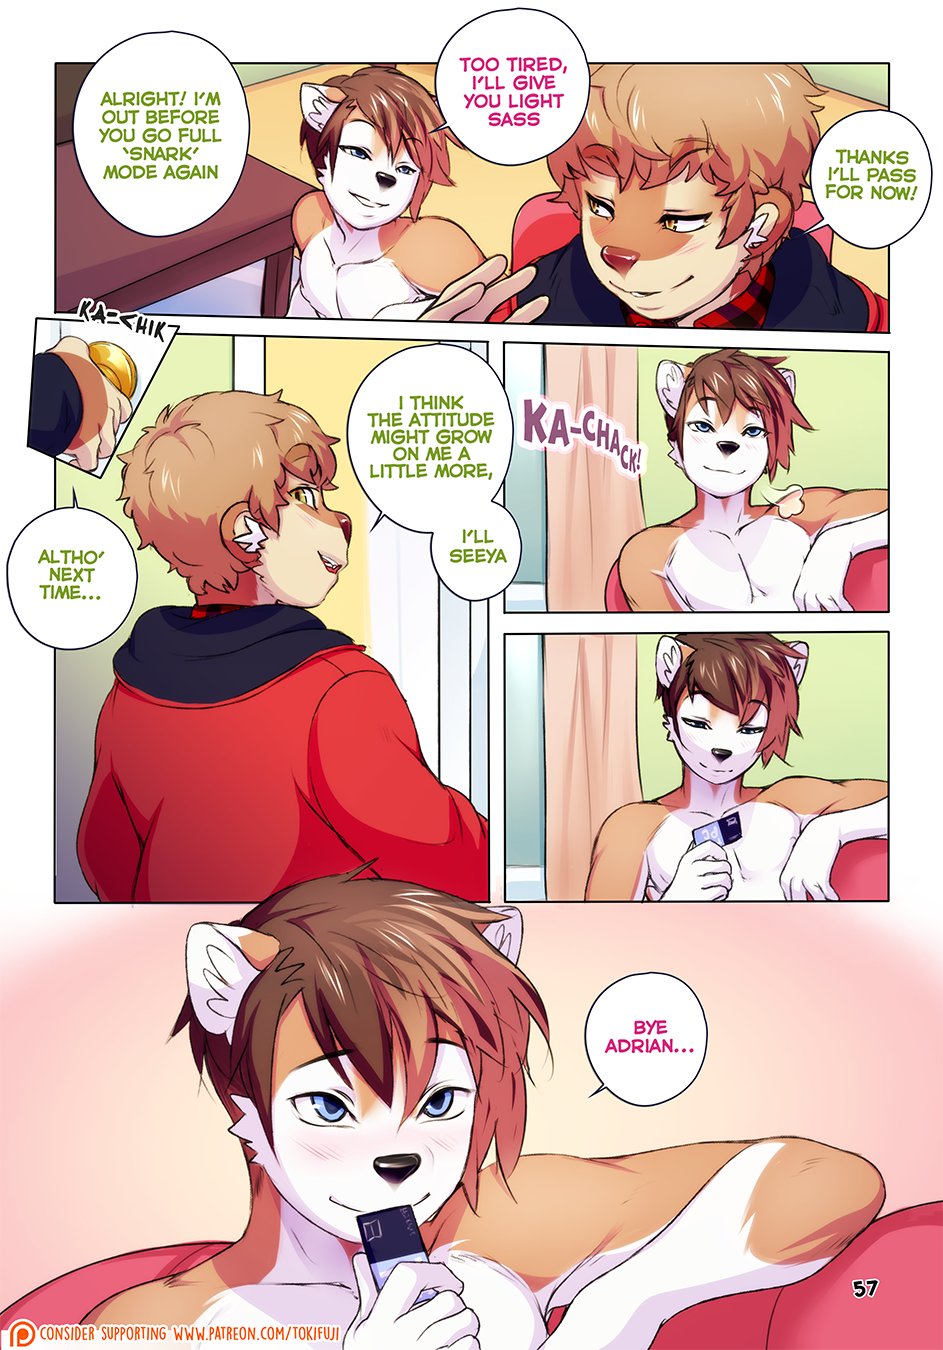 “Also OTB pg.57!

Consider supporting here! https://t.co/85...